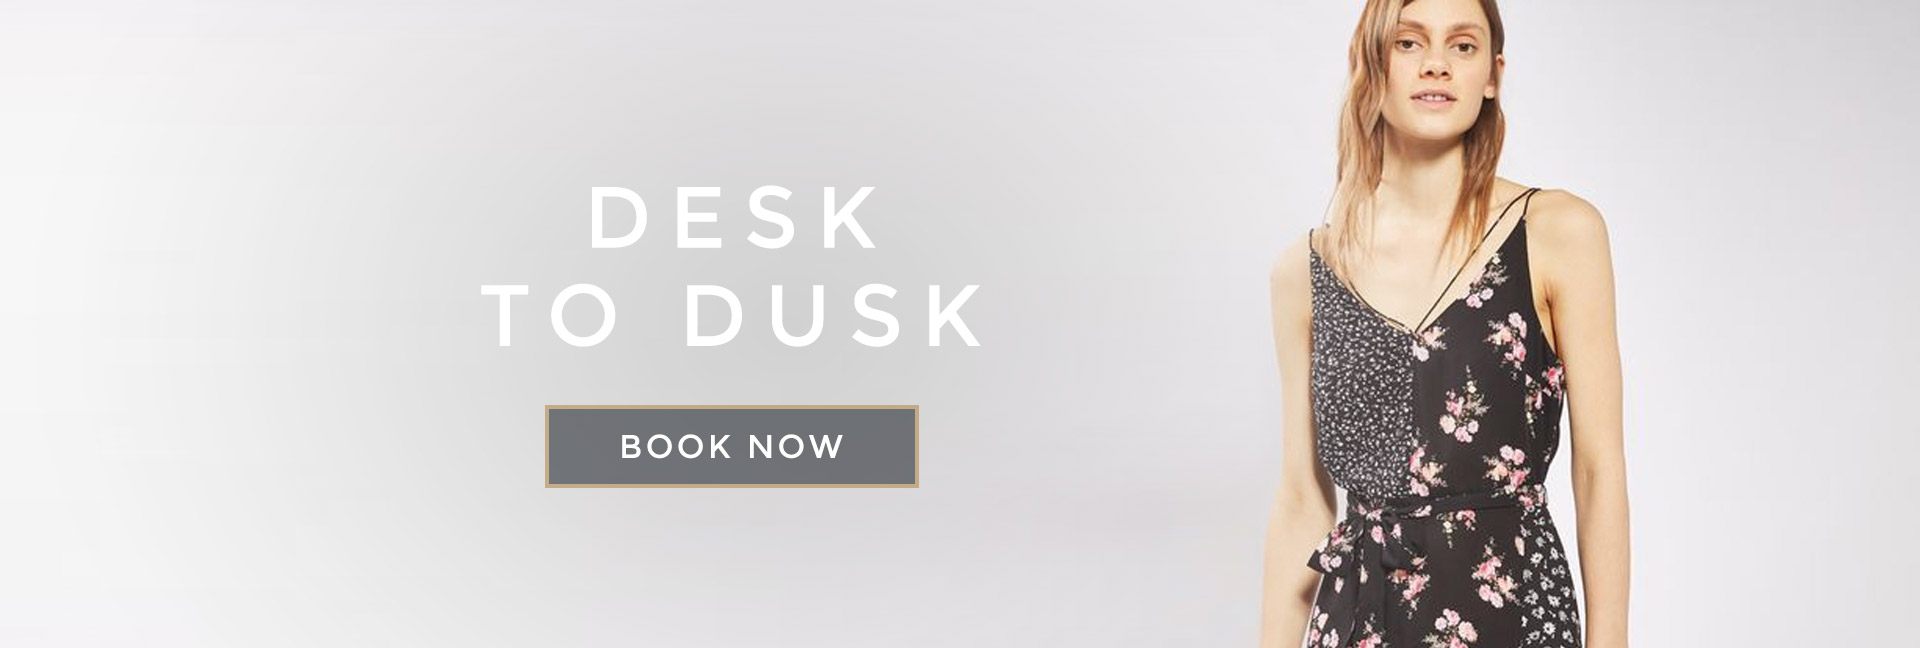 Desk to Dusk at All Bar One New Oxford Street - Book your table